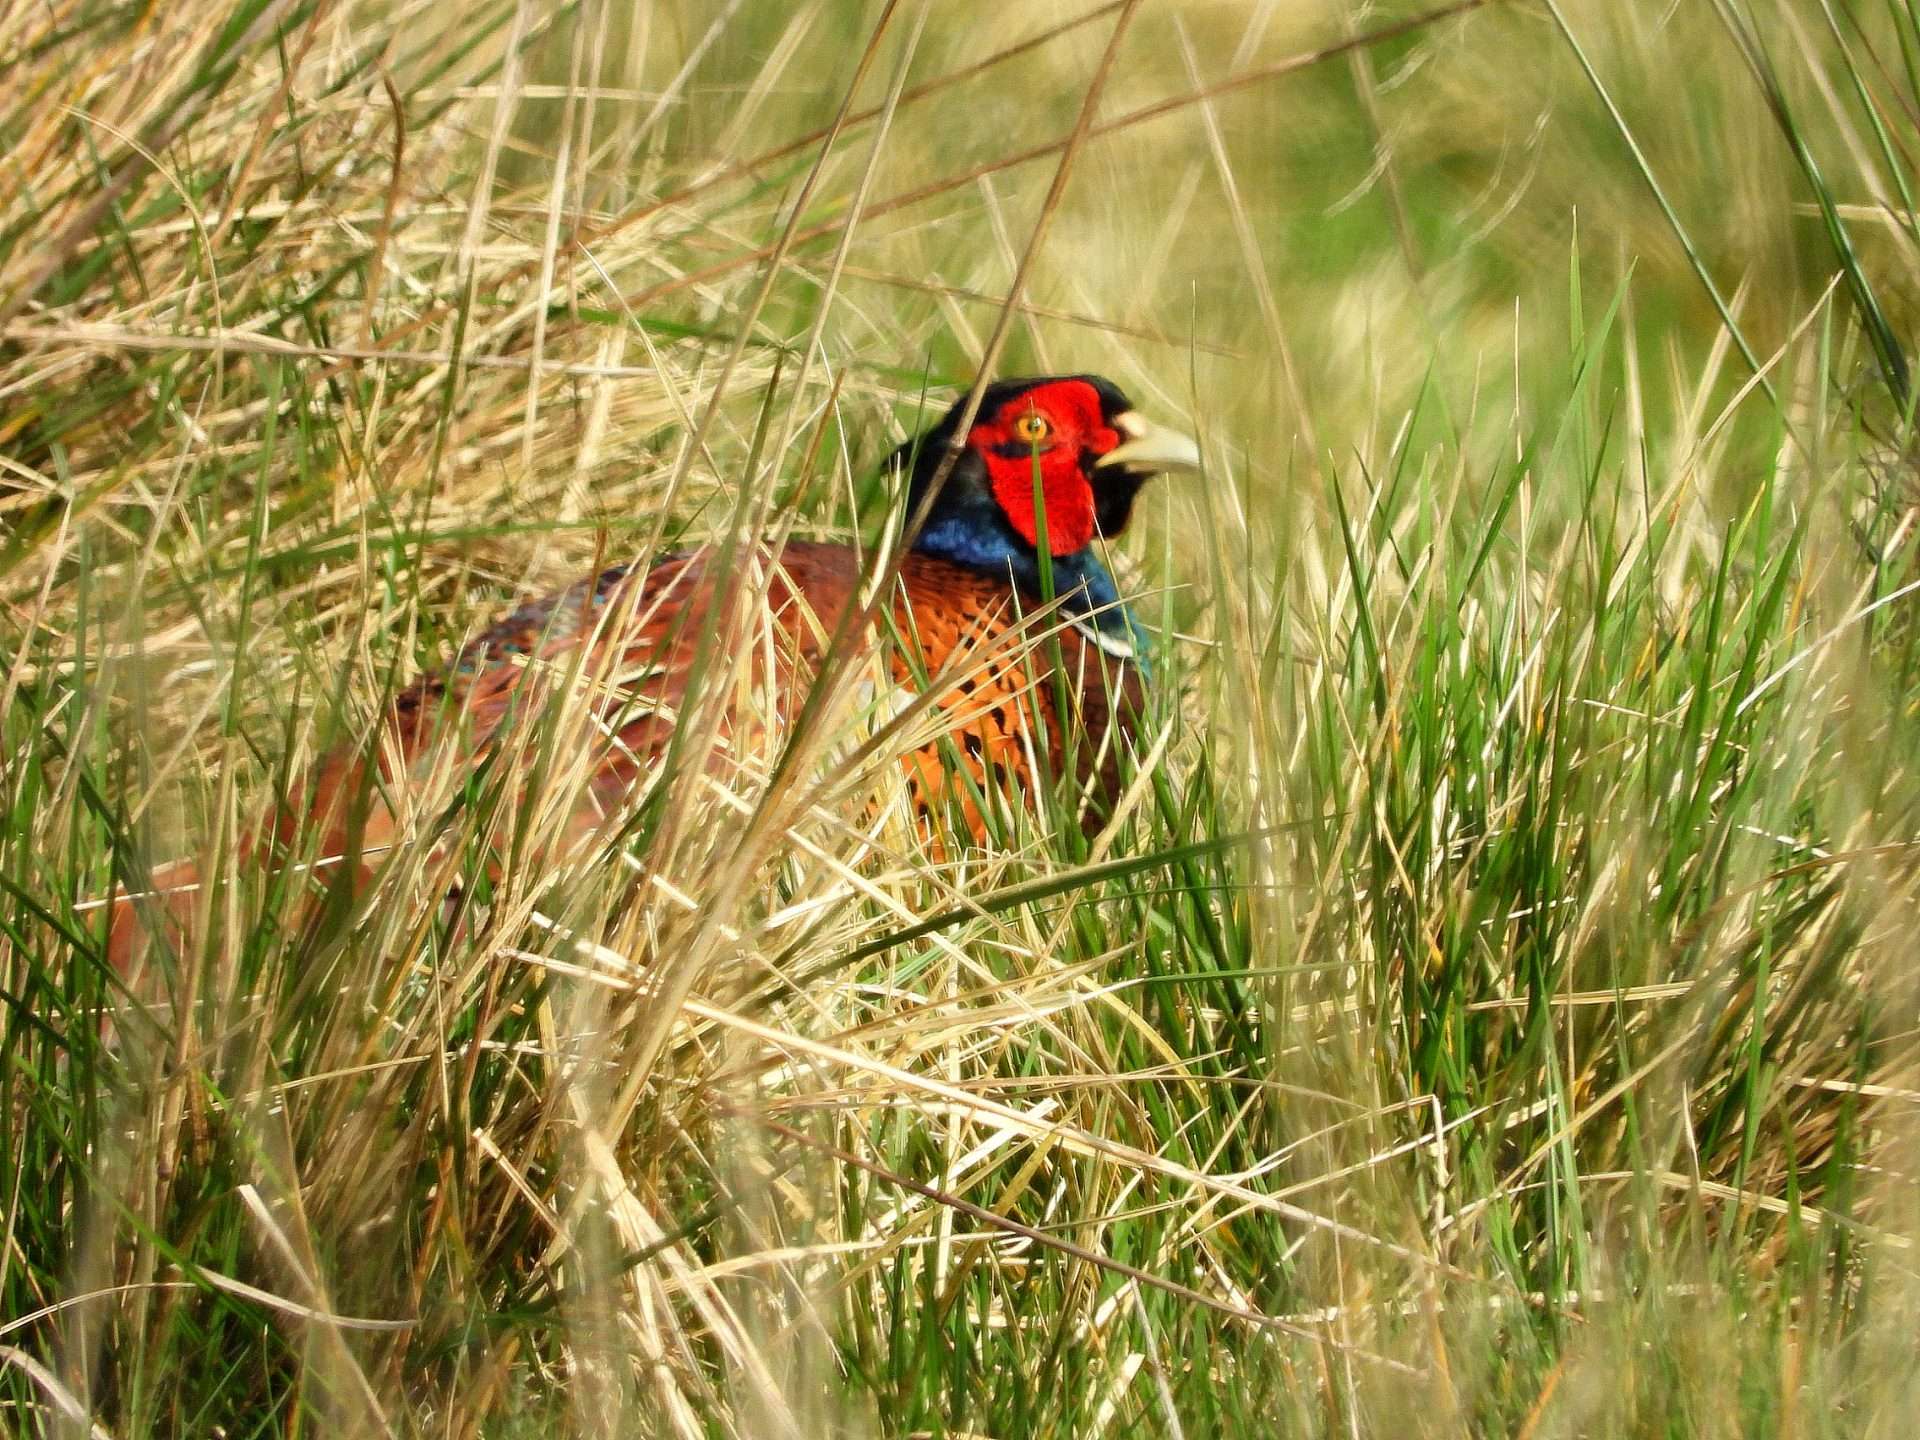 Pheasant by Kenneth Bradley at Exminster marshes RSPB